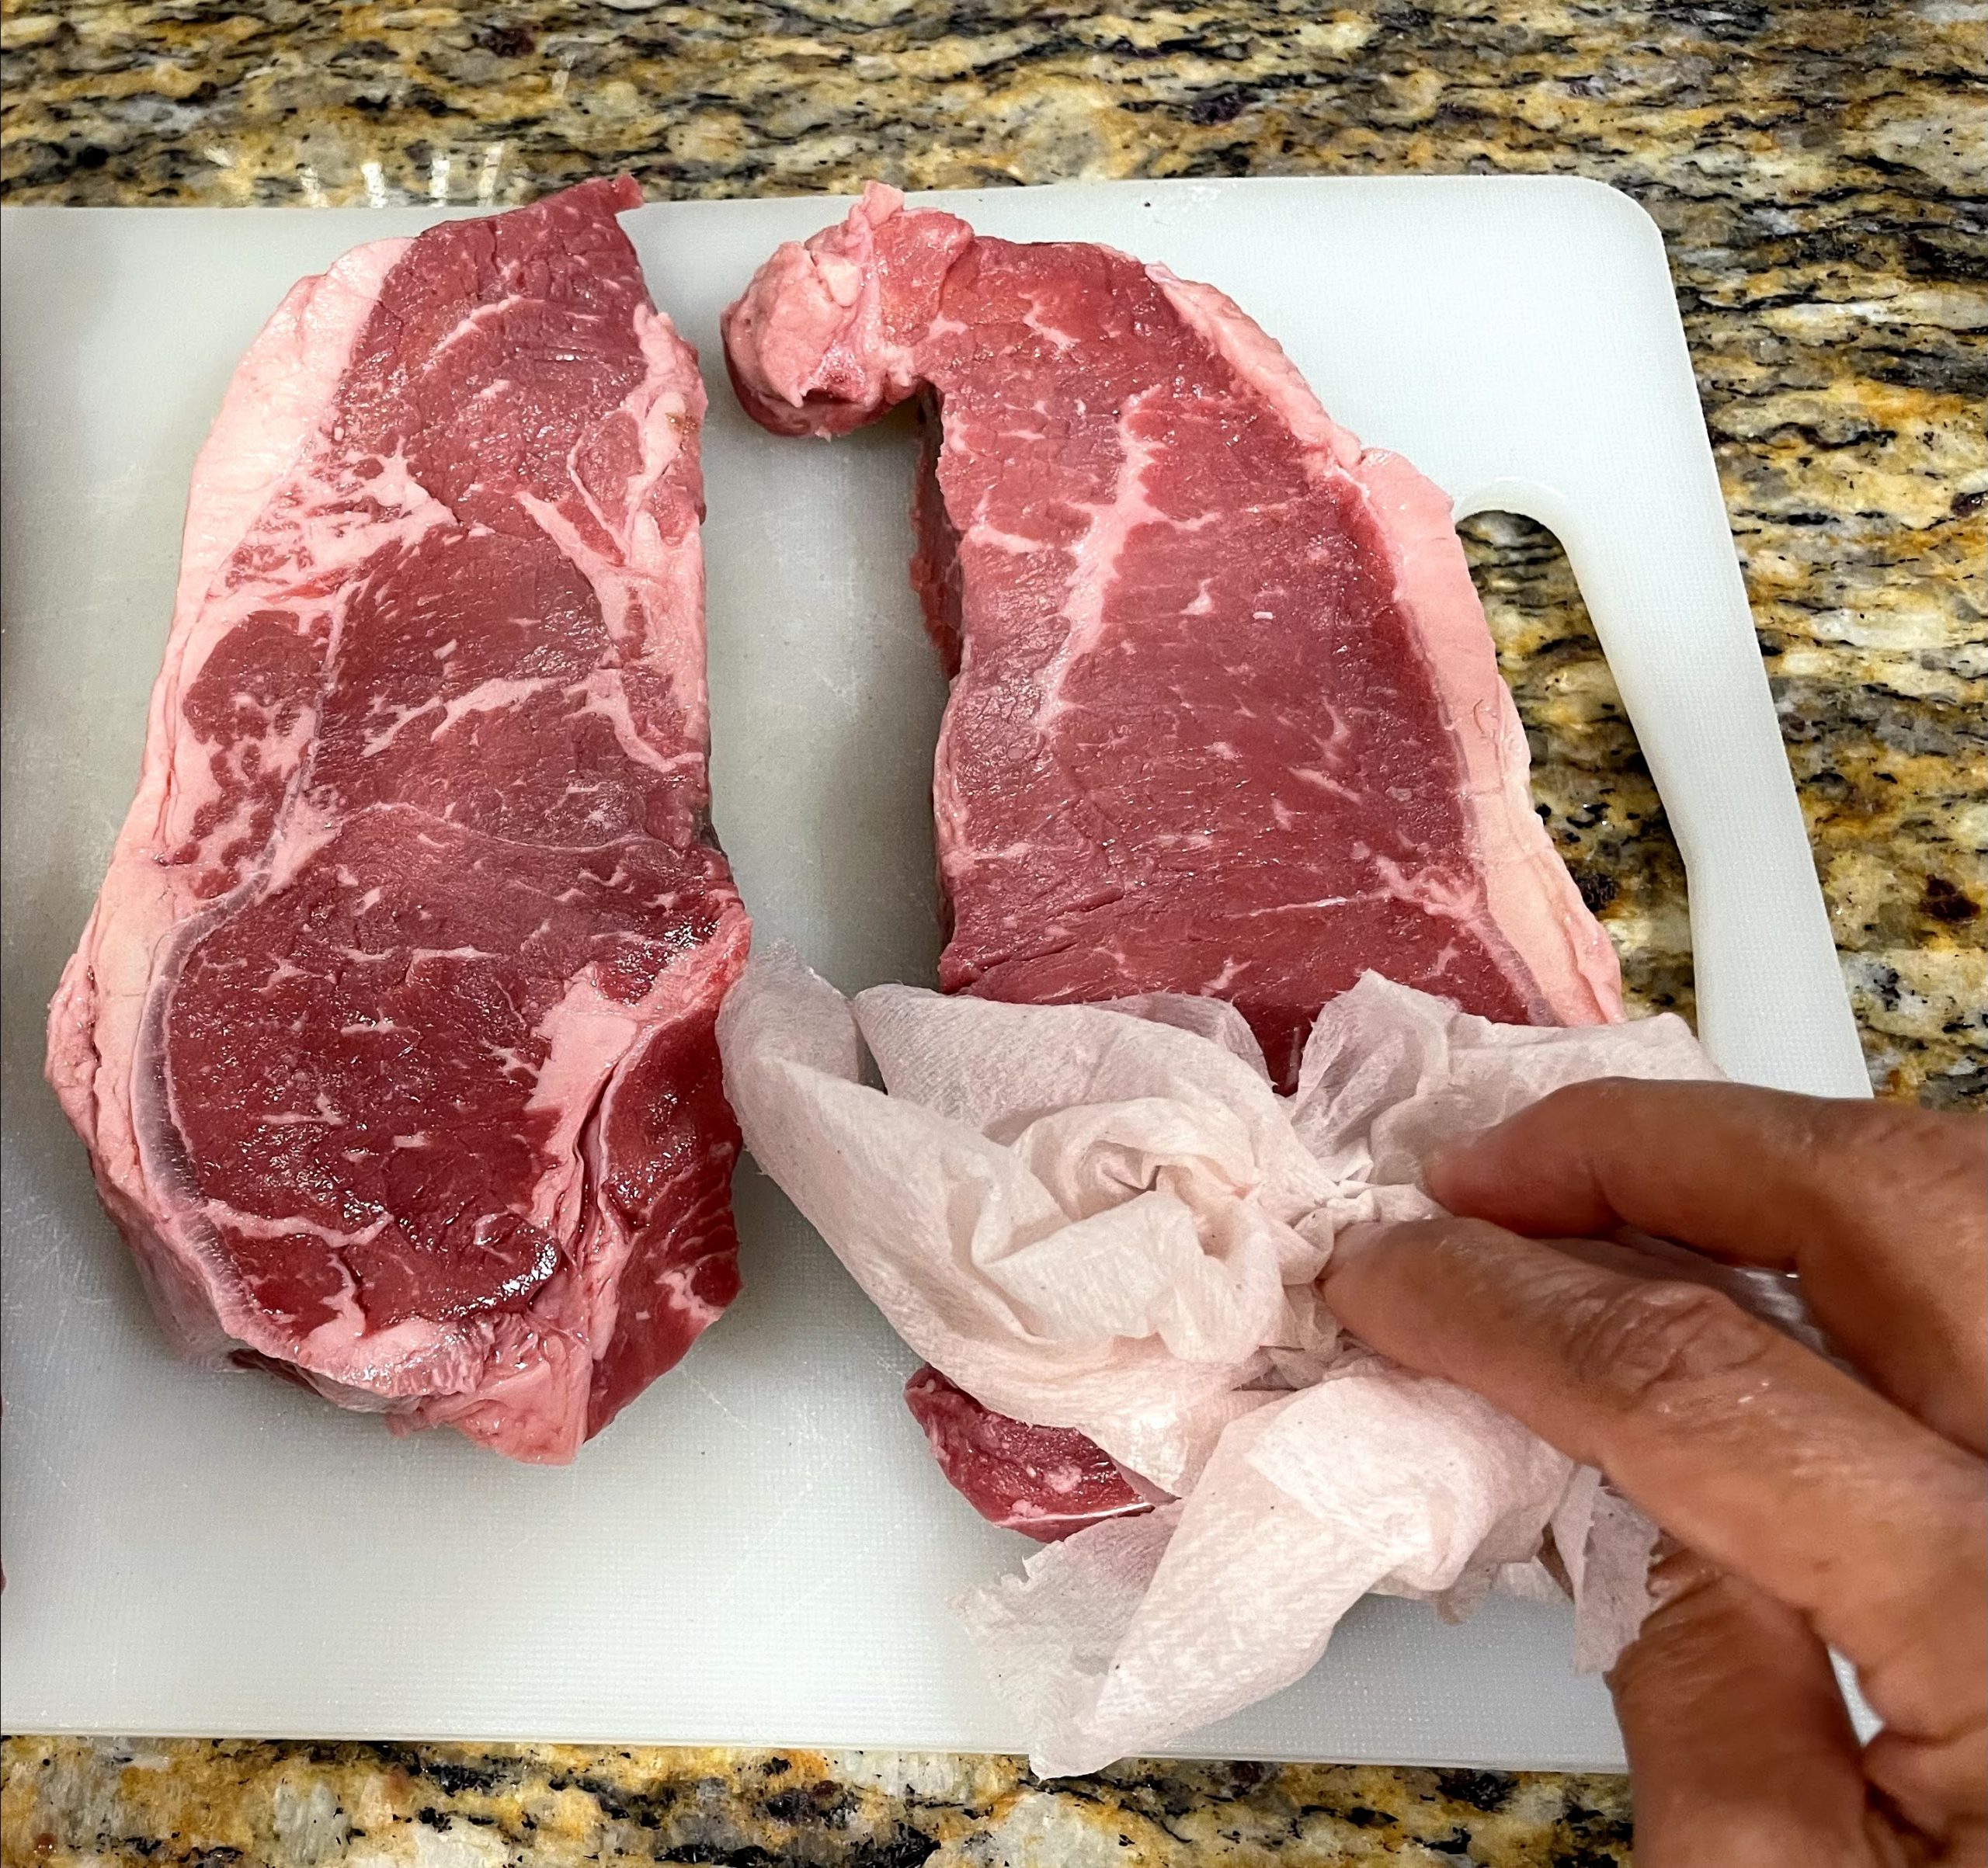 Dry steaks thoroughly after washing.